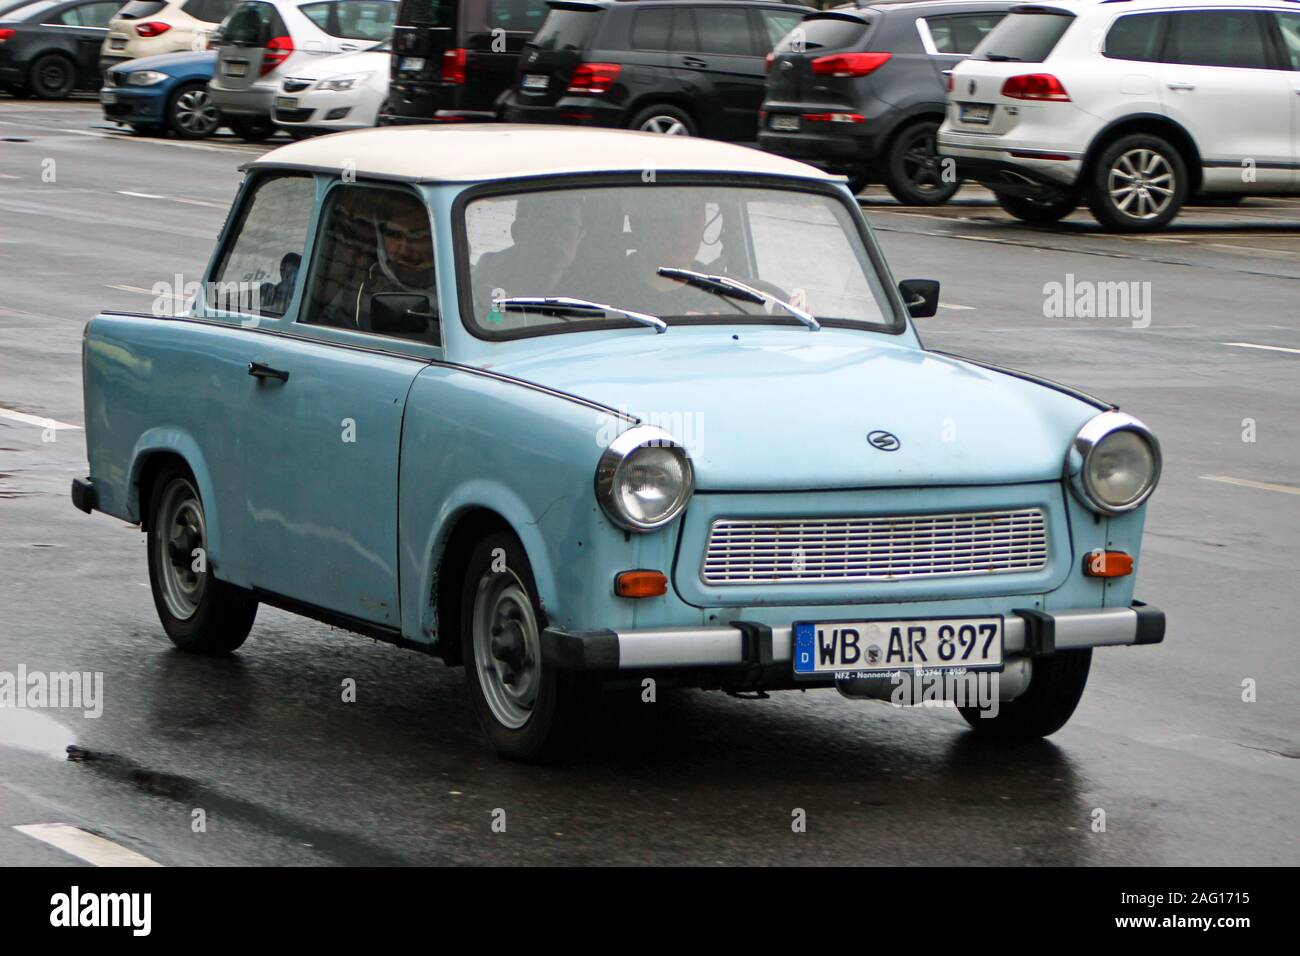 Vintage Trabant car from DDR day in Berlin, Germany Stock Photo